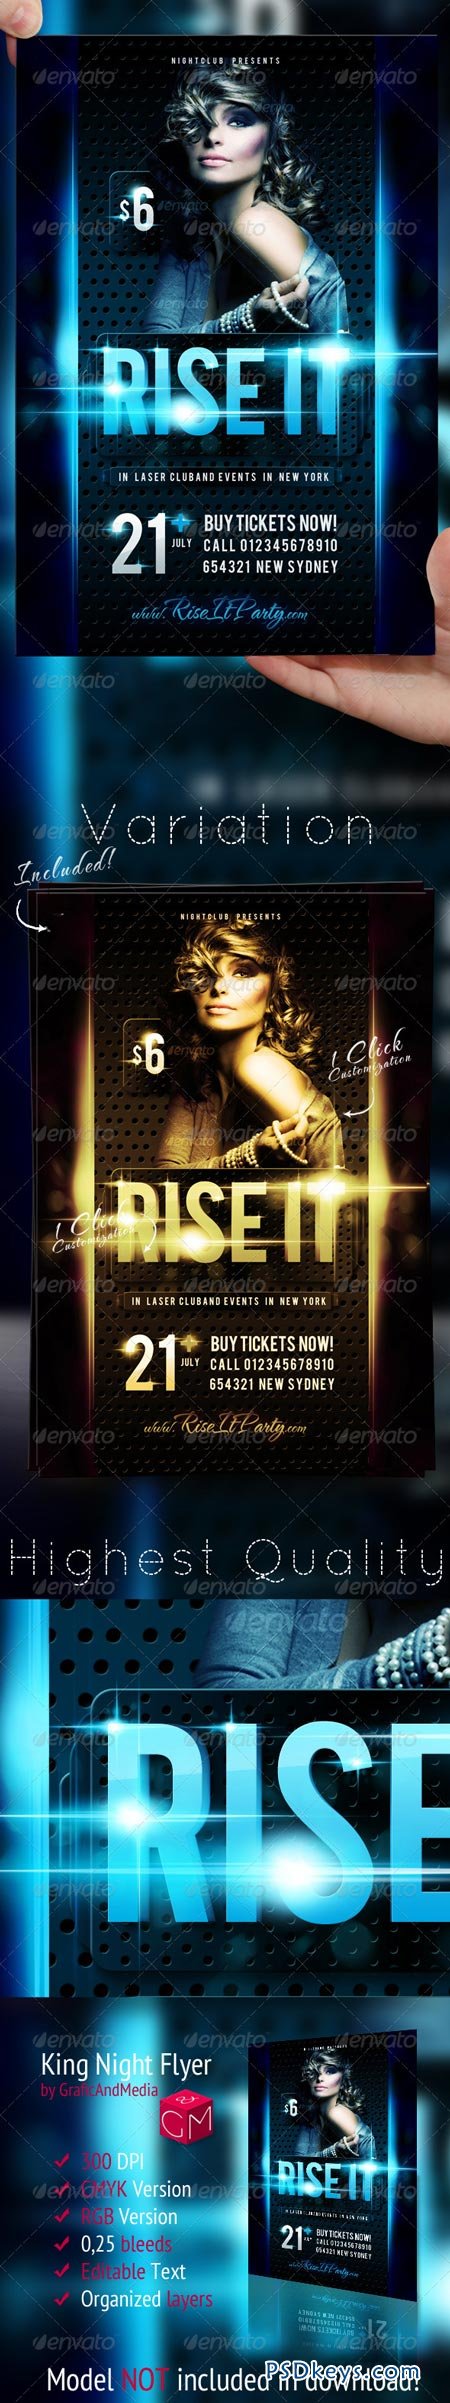 Rise It Party Flyer Template 2570797